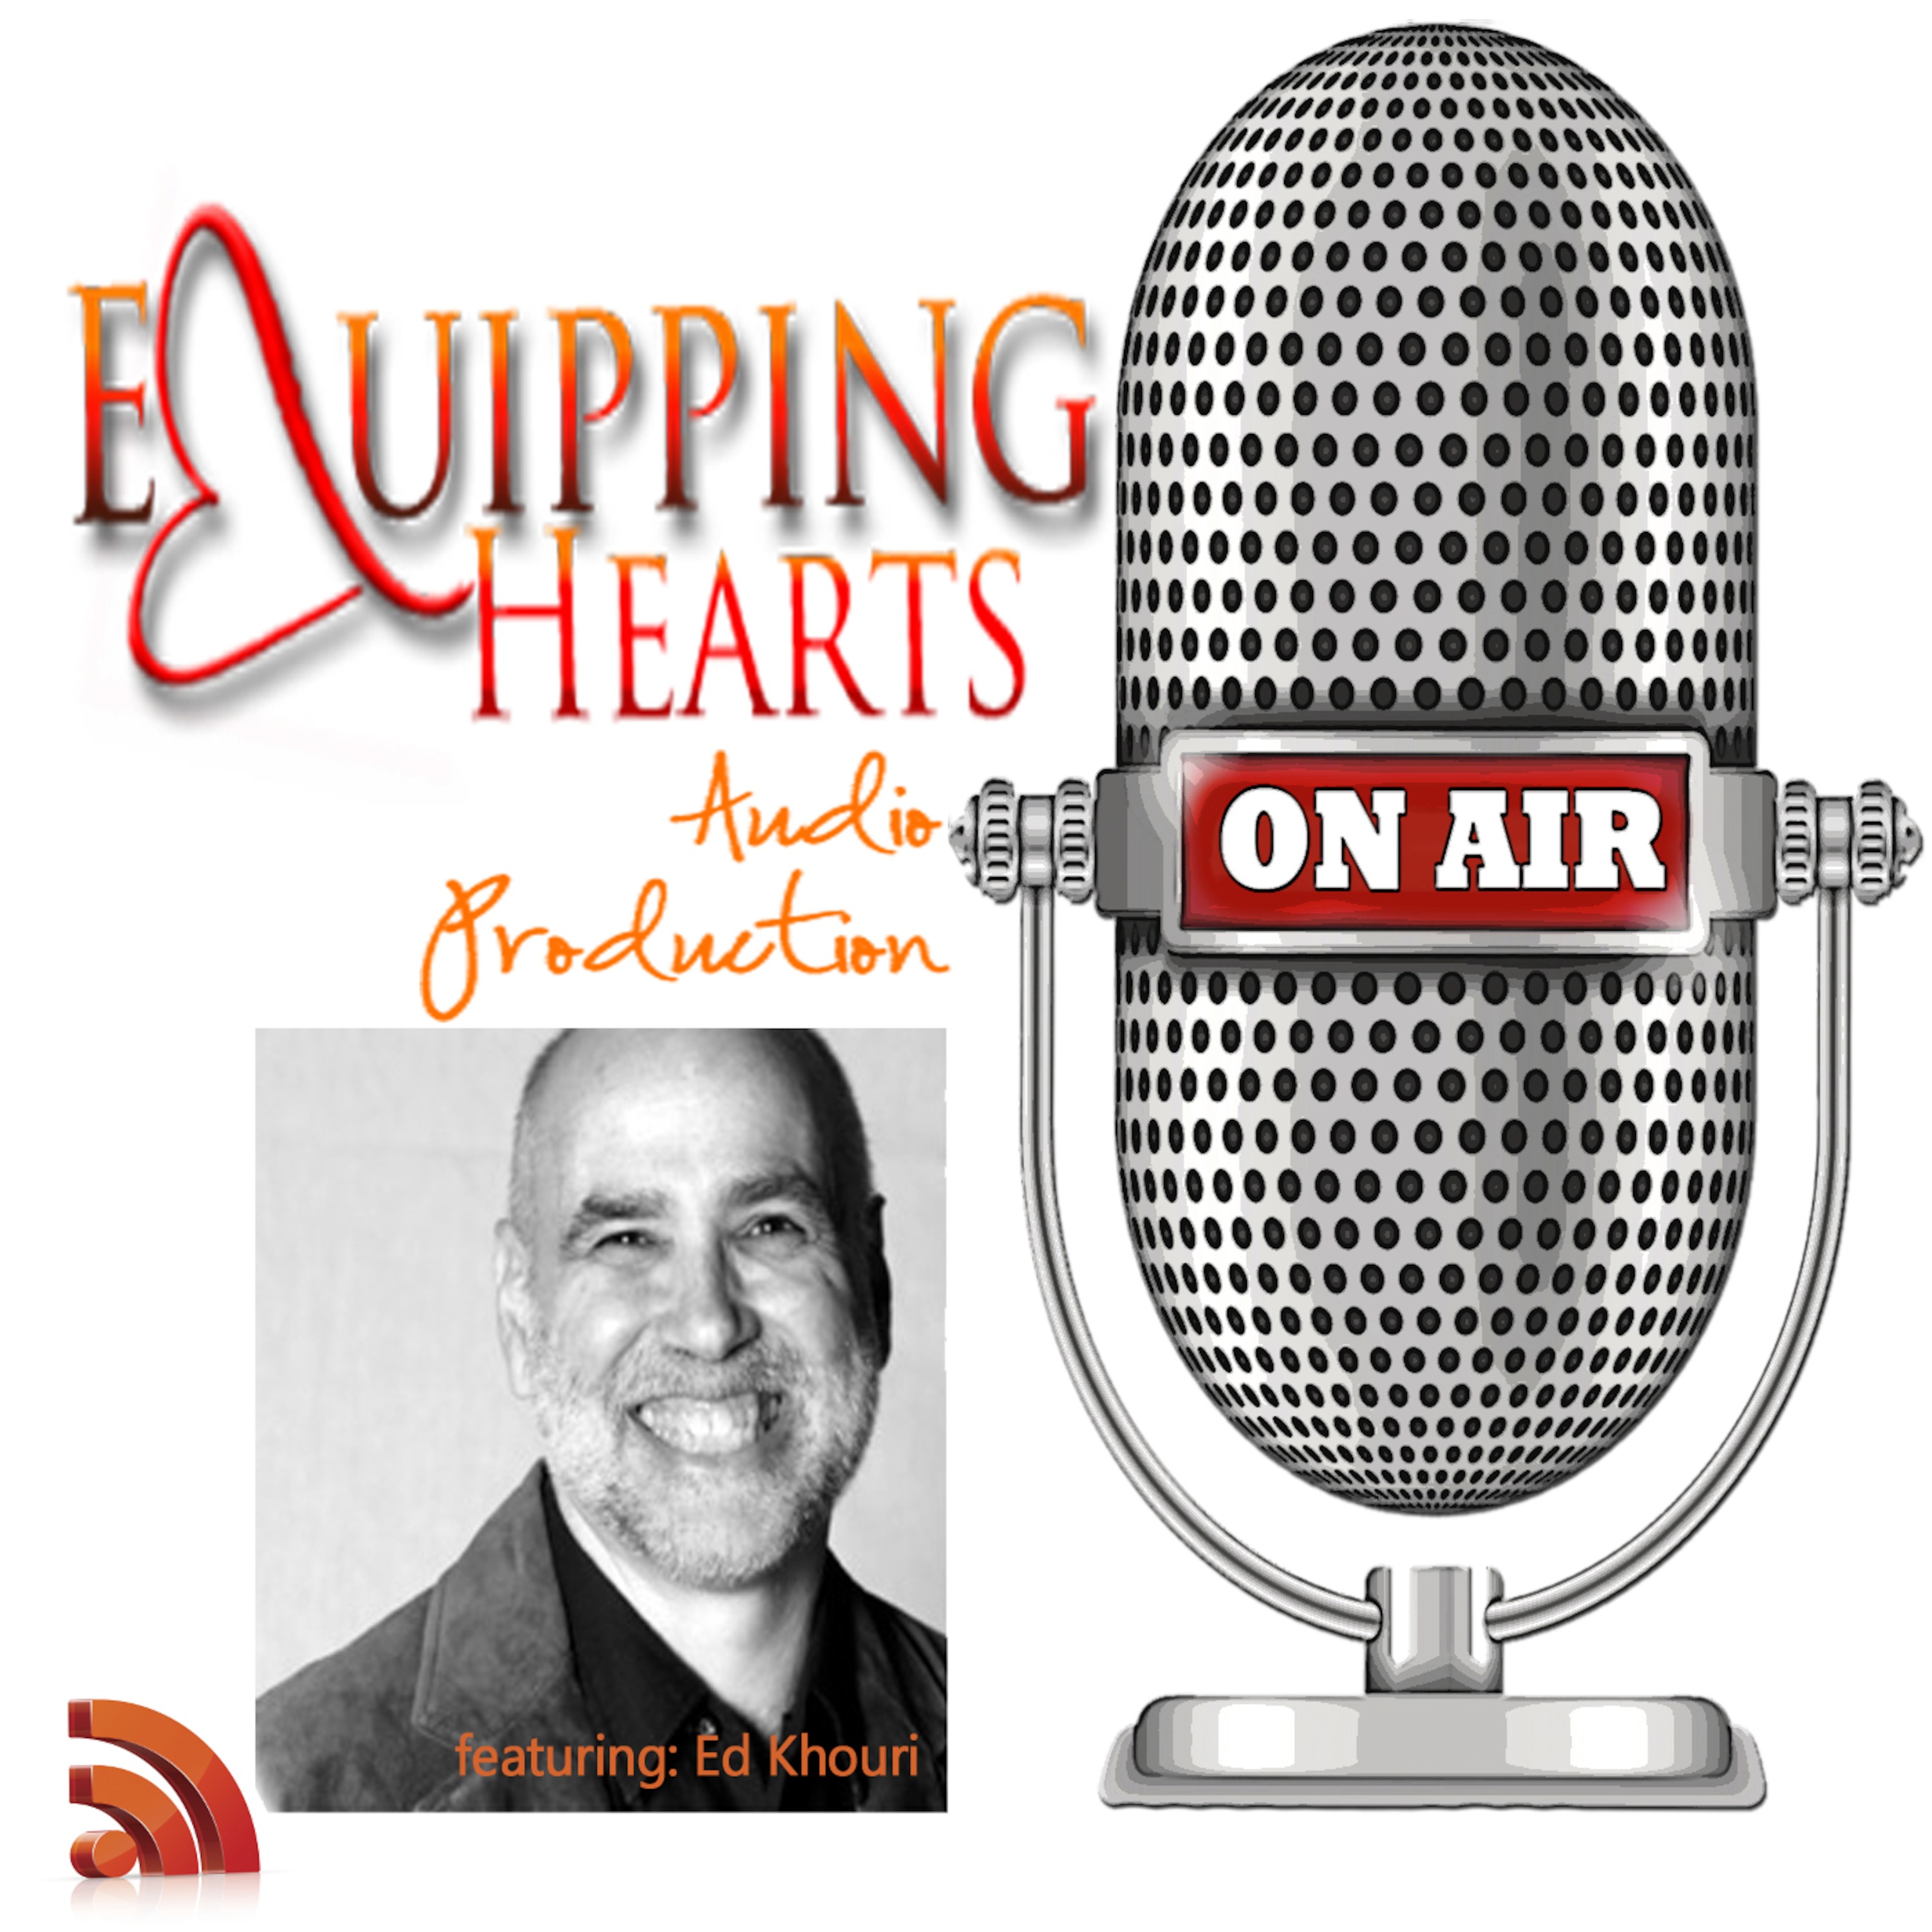 Equipping Hearts Audio Productions with Ed Khouri